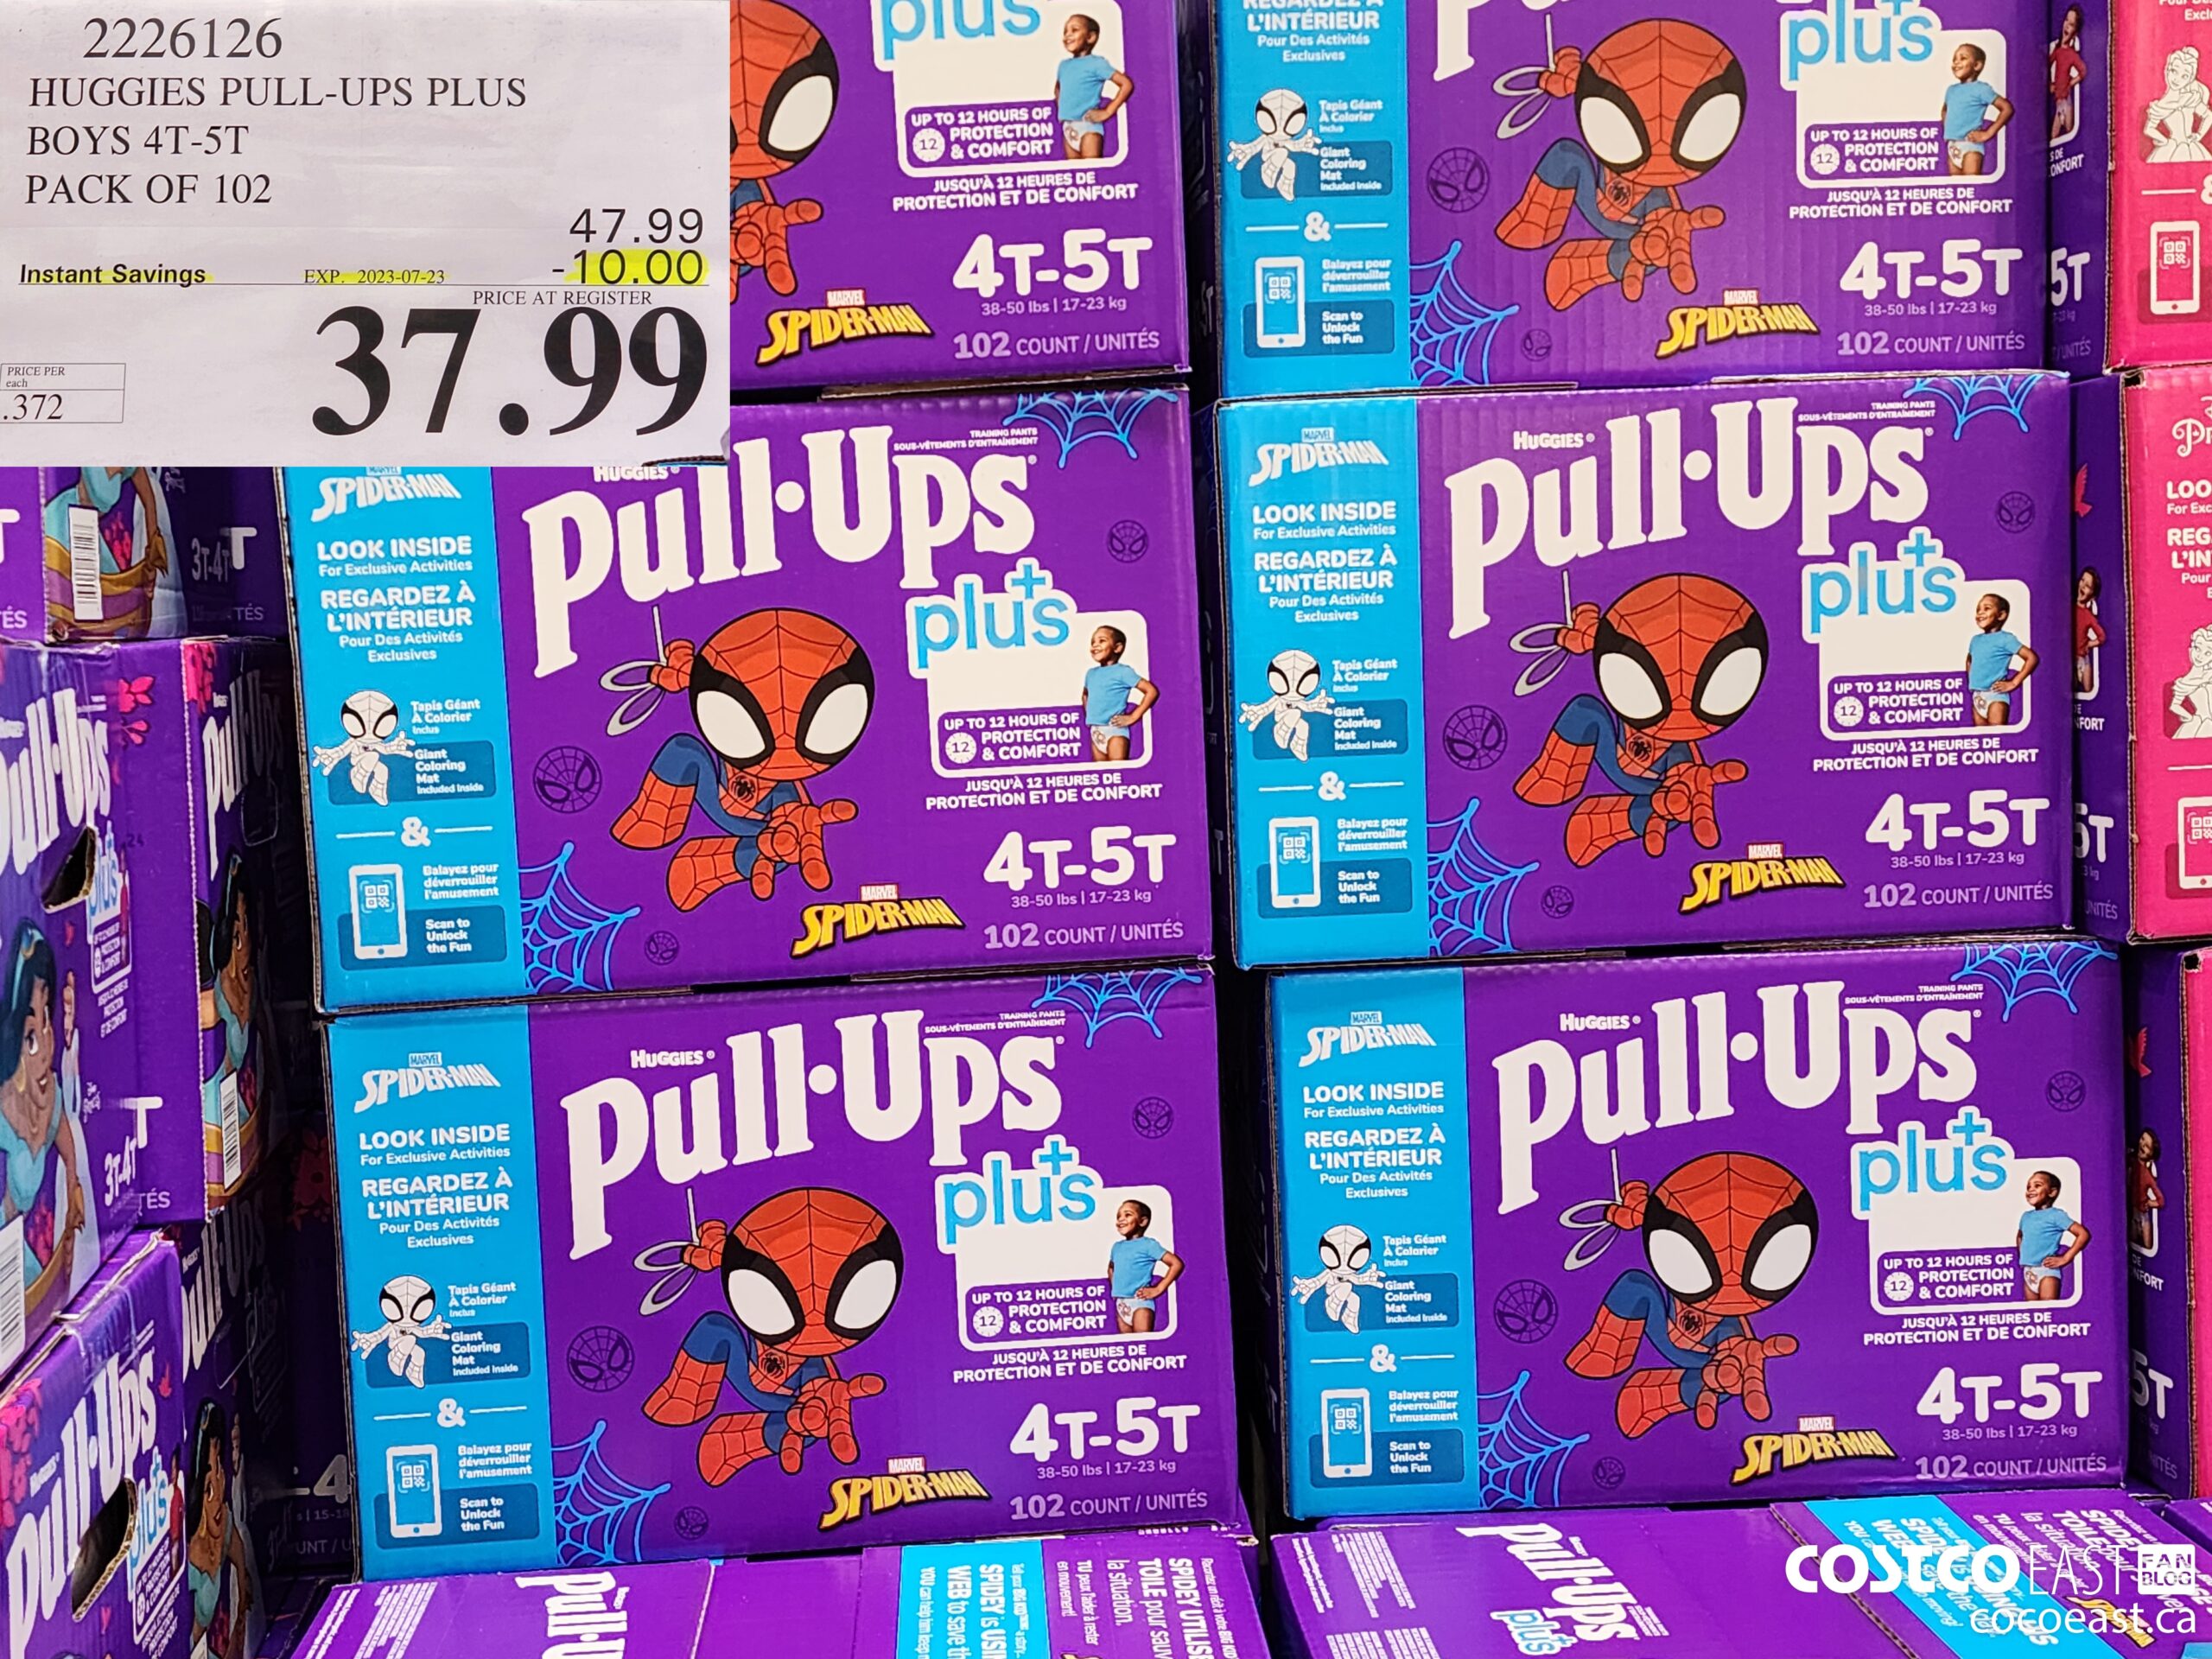 2226126 huggies pull ups plus boys 4t 5t pack of 102 9 50 instant savings  expires on 2021 09 19 36 49 - Costco East Fan Blog